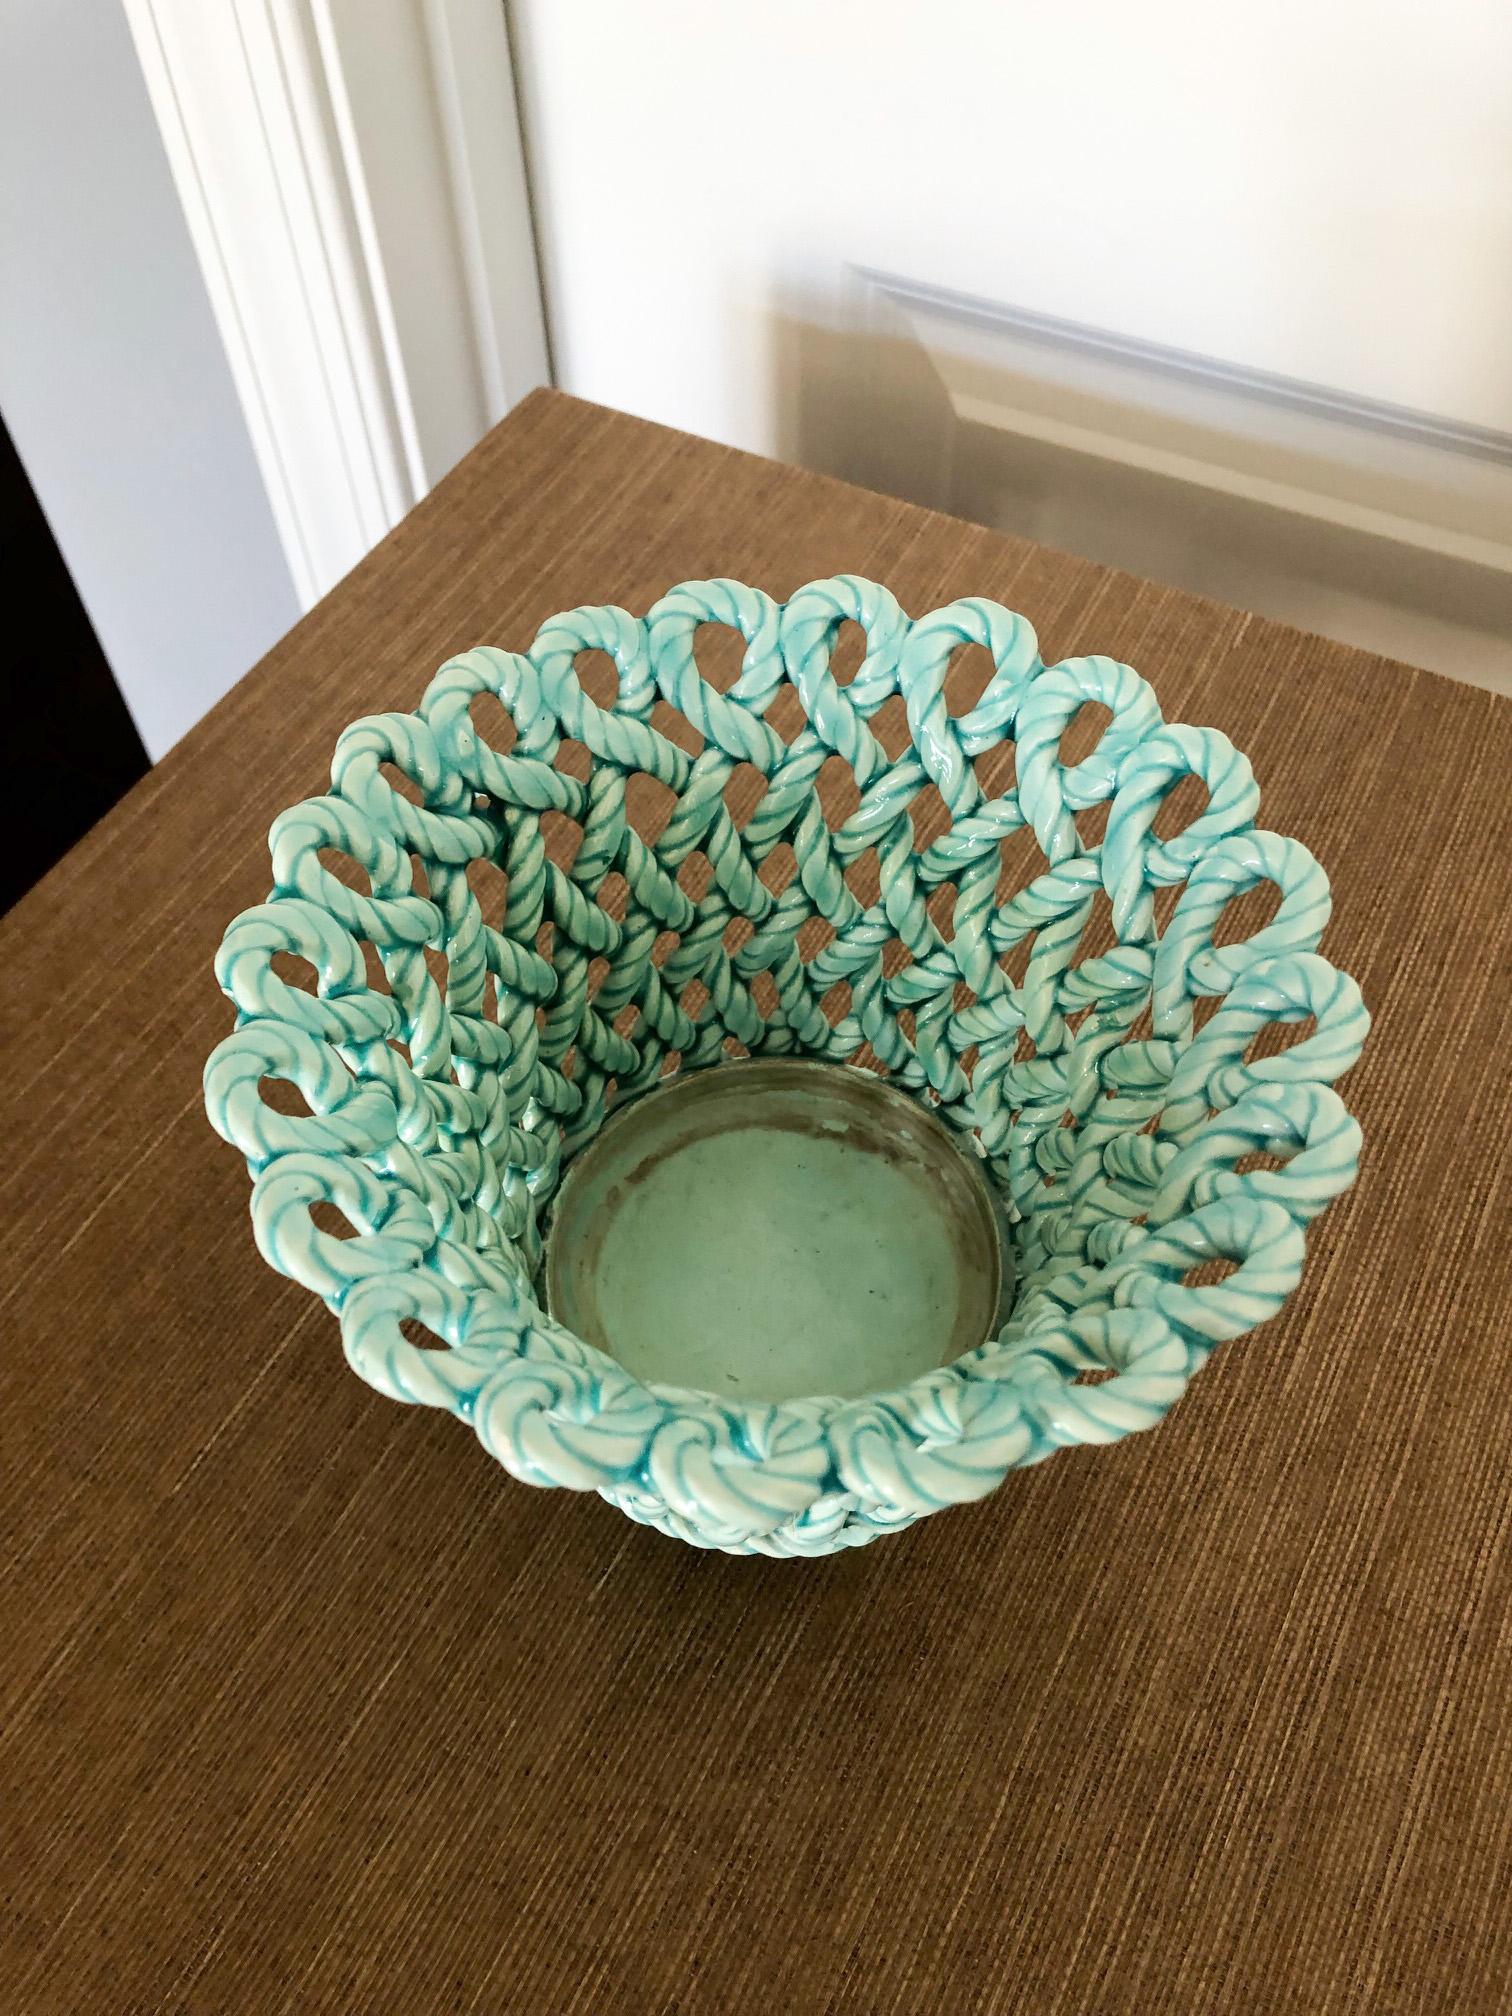 A lovely turquoise glazed ceramic cachepot, stamped Made in Spain. Holds a 3.5